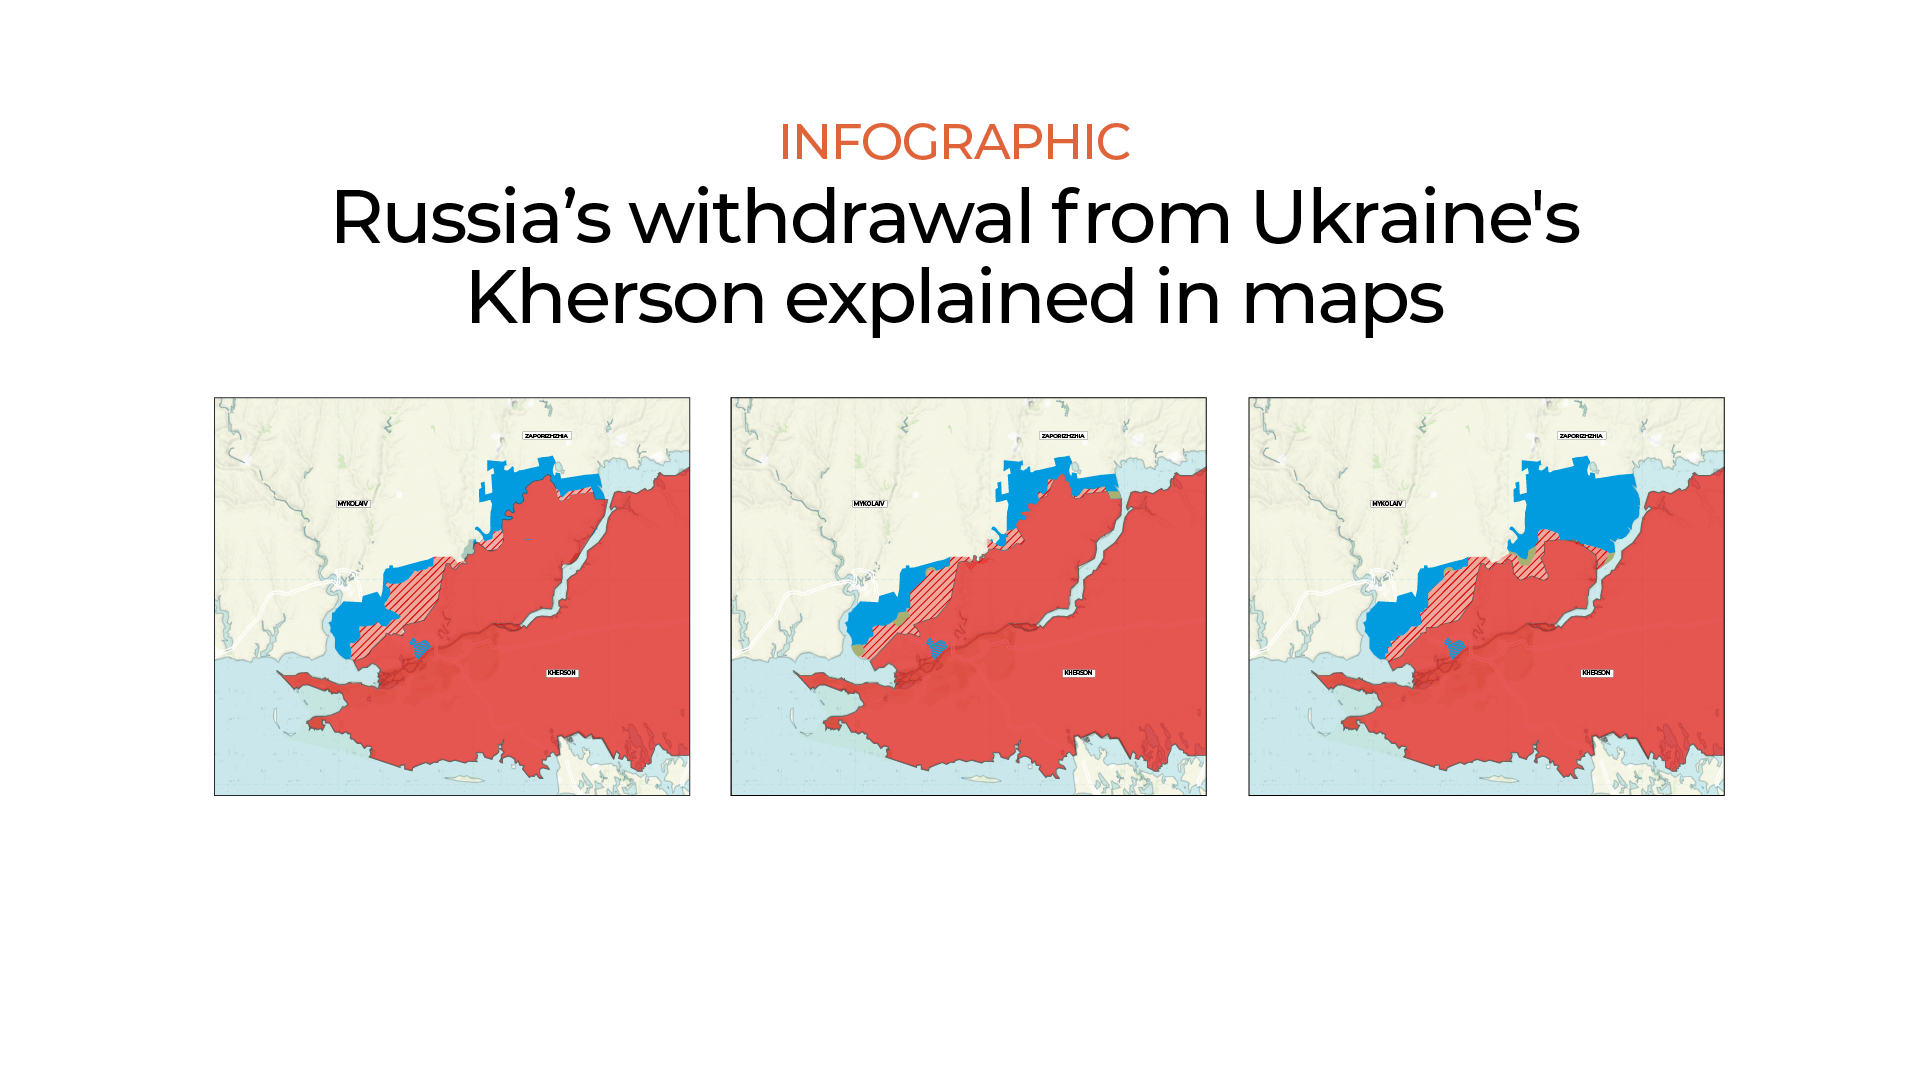 Russia’s withdrawal from Ukraine’s Kherson city explained in maps